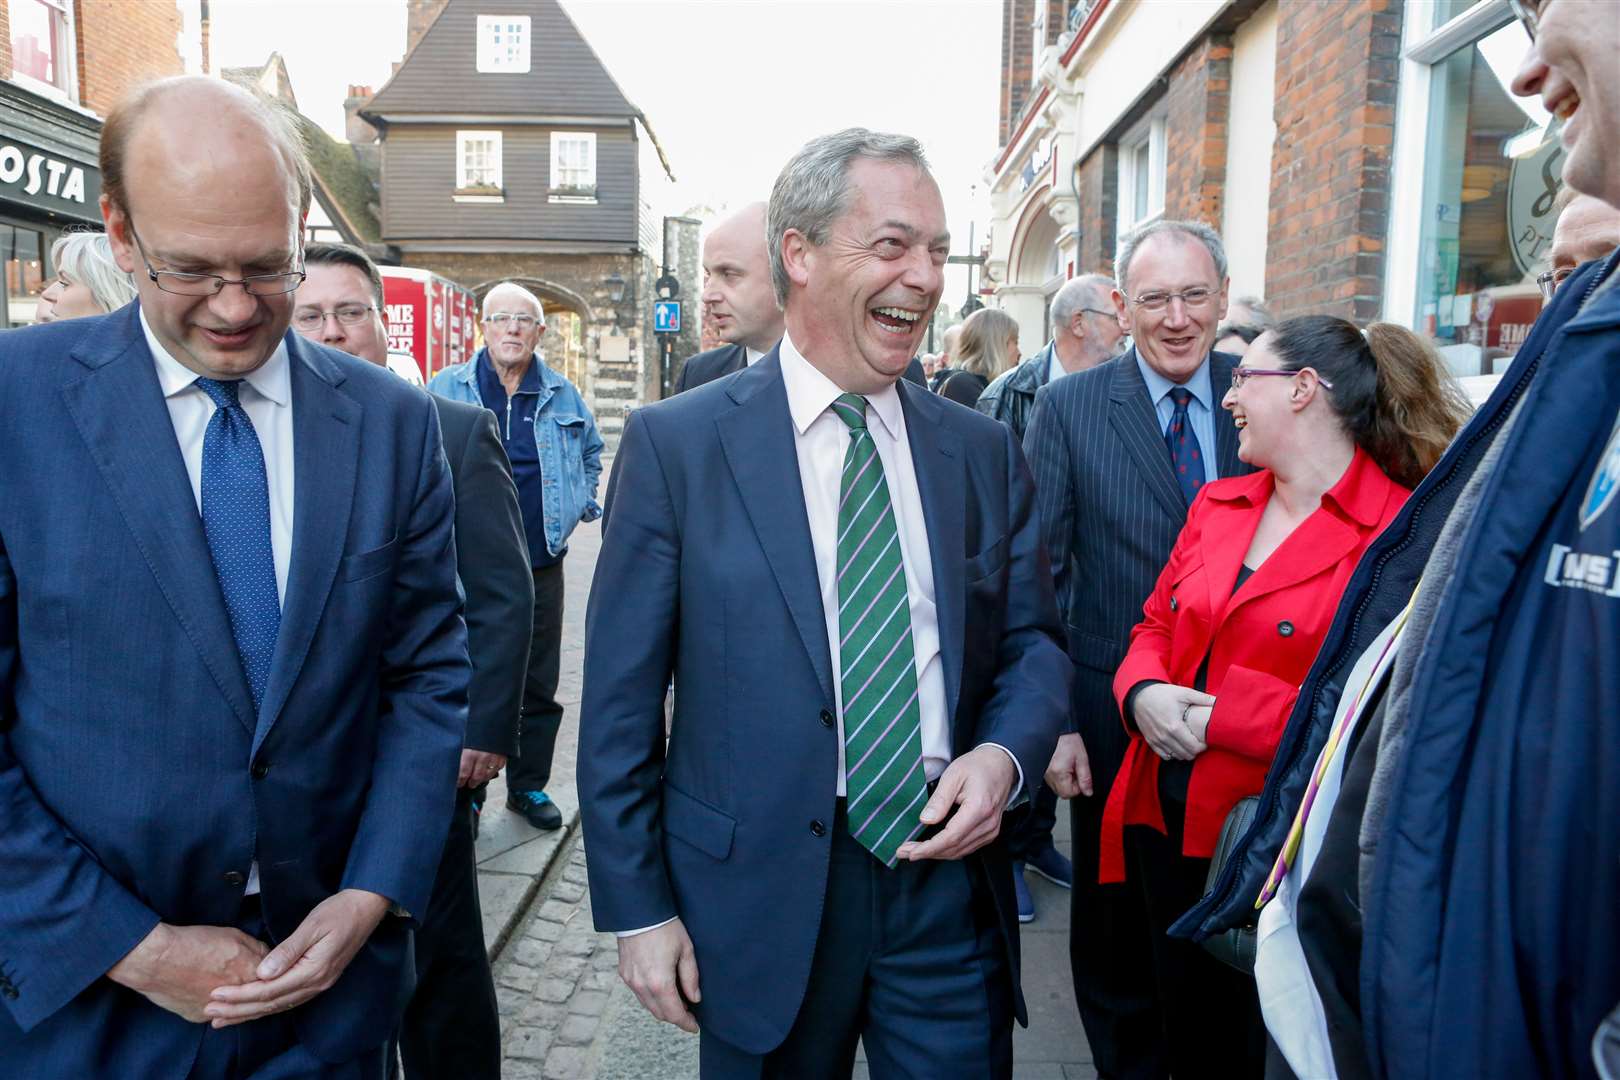 Mark Reckless and Nigel Farage in Rochester